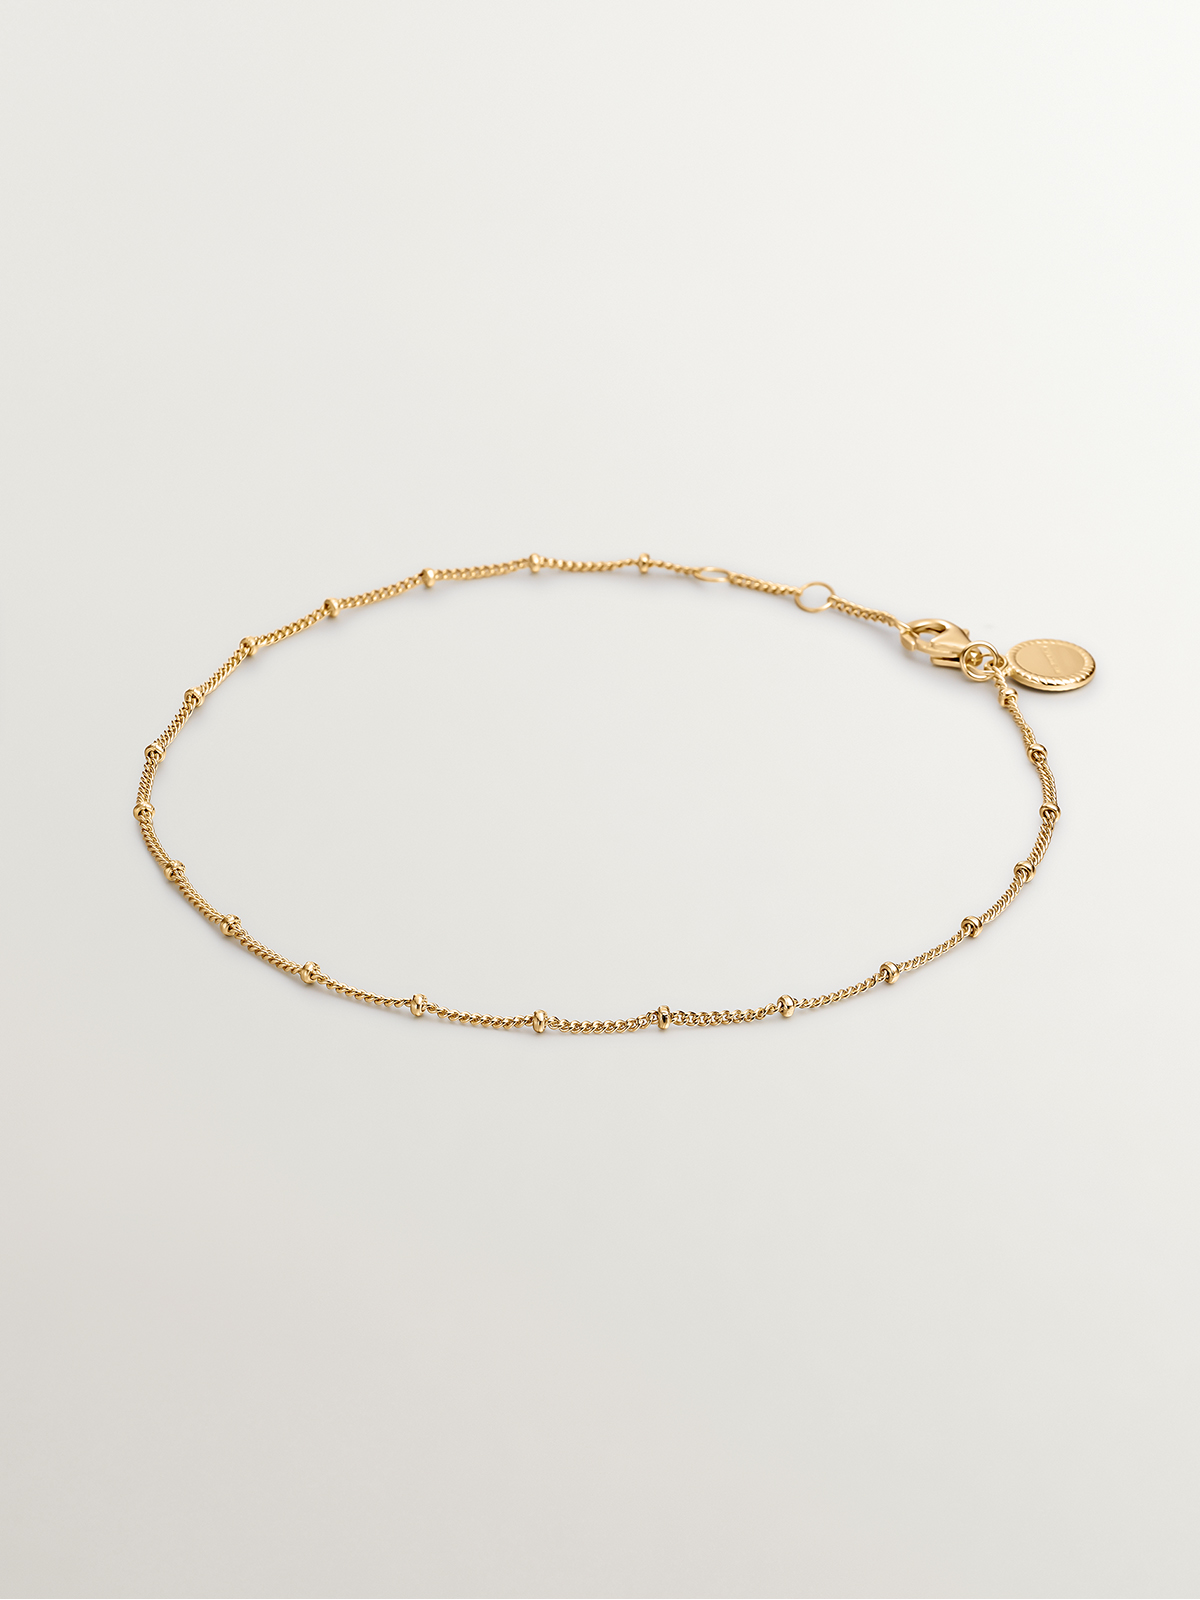 925 Silver anklet bathed in 18K yellow gold with beads.